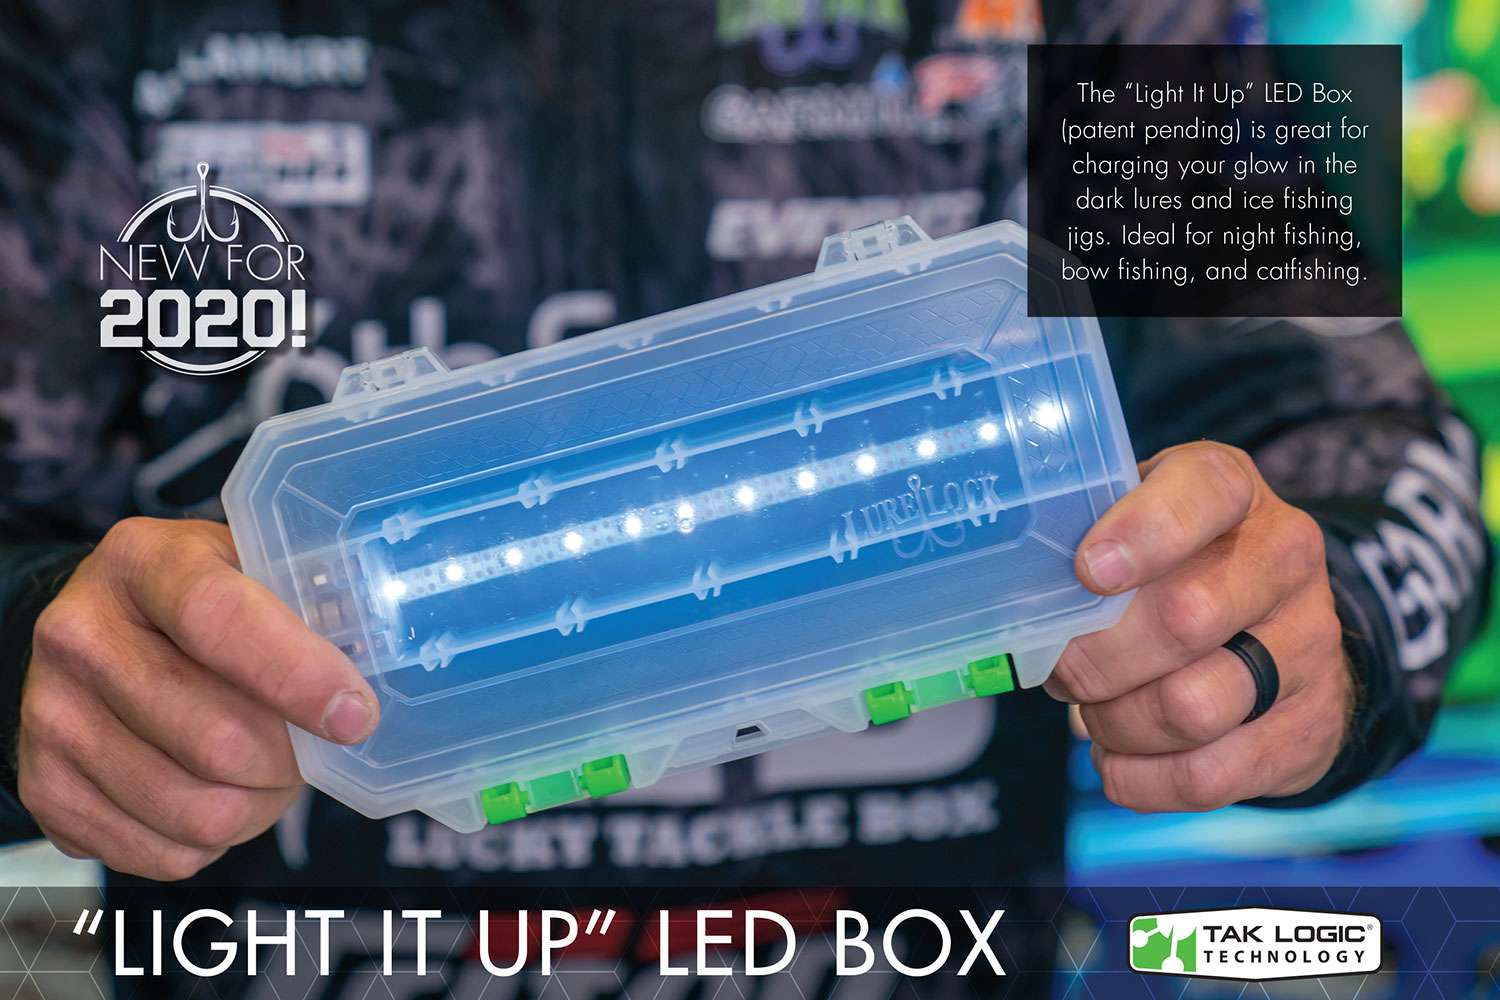 <p><b>Tak Logic Lure Lock LED</b></p>
For those nighttime fishing excursions or when you are rigging up early in the morning for a day on the water, the new Lure Lock LED Box is designed to help you easily see those small tackle items in the dark. In addition, for anglers that use glow-in-the dark lures, the LED lights will charge the paint on them so theyâll be ready to entice finicky fish into biting.</p>

<p>The Lure Lock LED Box has a light strip down the center of the box that is safely placed underneath the Tak Logic Technology, protecting it from the elements.  The three-way switch allows it to be in three modes: On, off and auto â allowing it to turn on automatically when the lid of the box is opened. The LED Box is powered by three batteries, which are included and easy to replace.
 <br>
<p><b>MSRP: $21.99</b></p>
<a href=